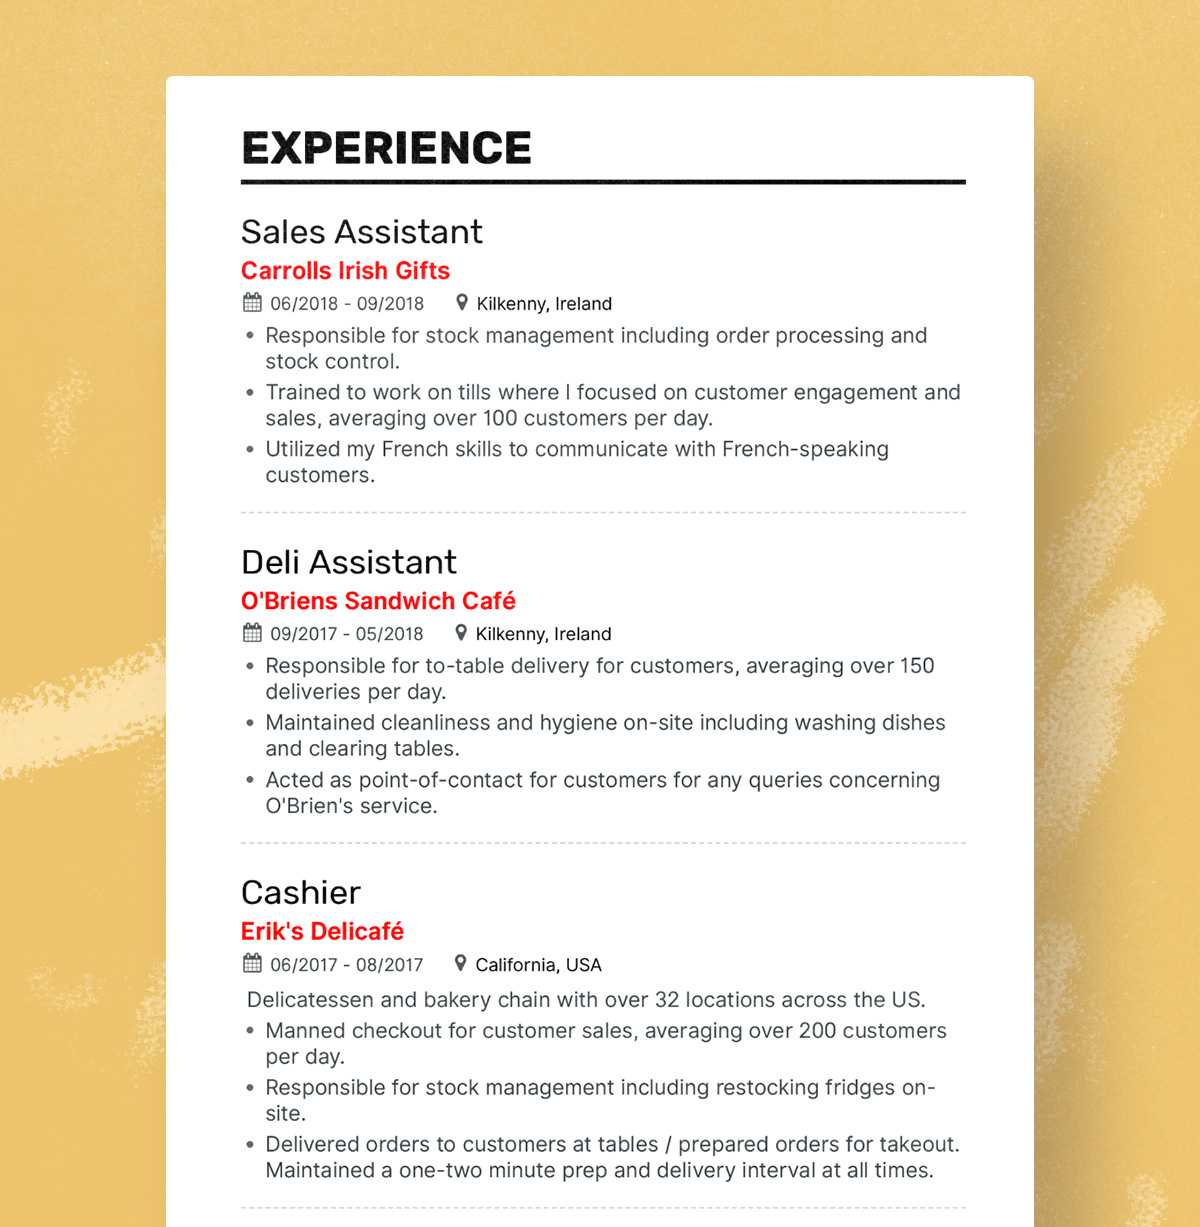 Retail resume experience section